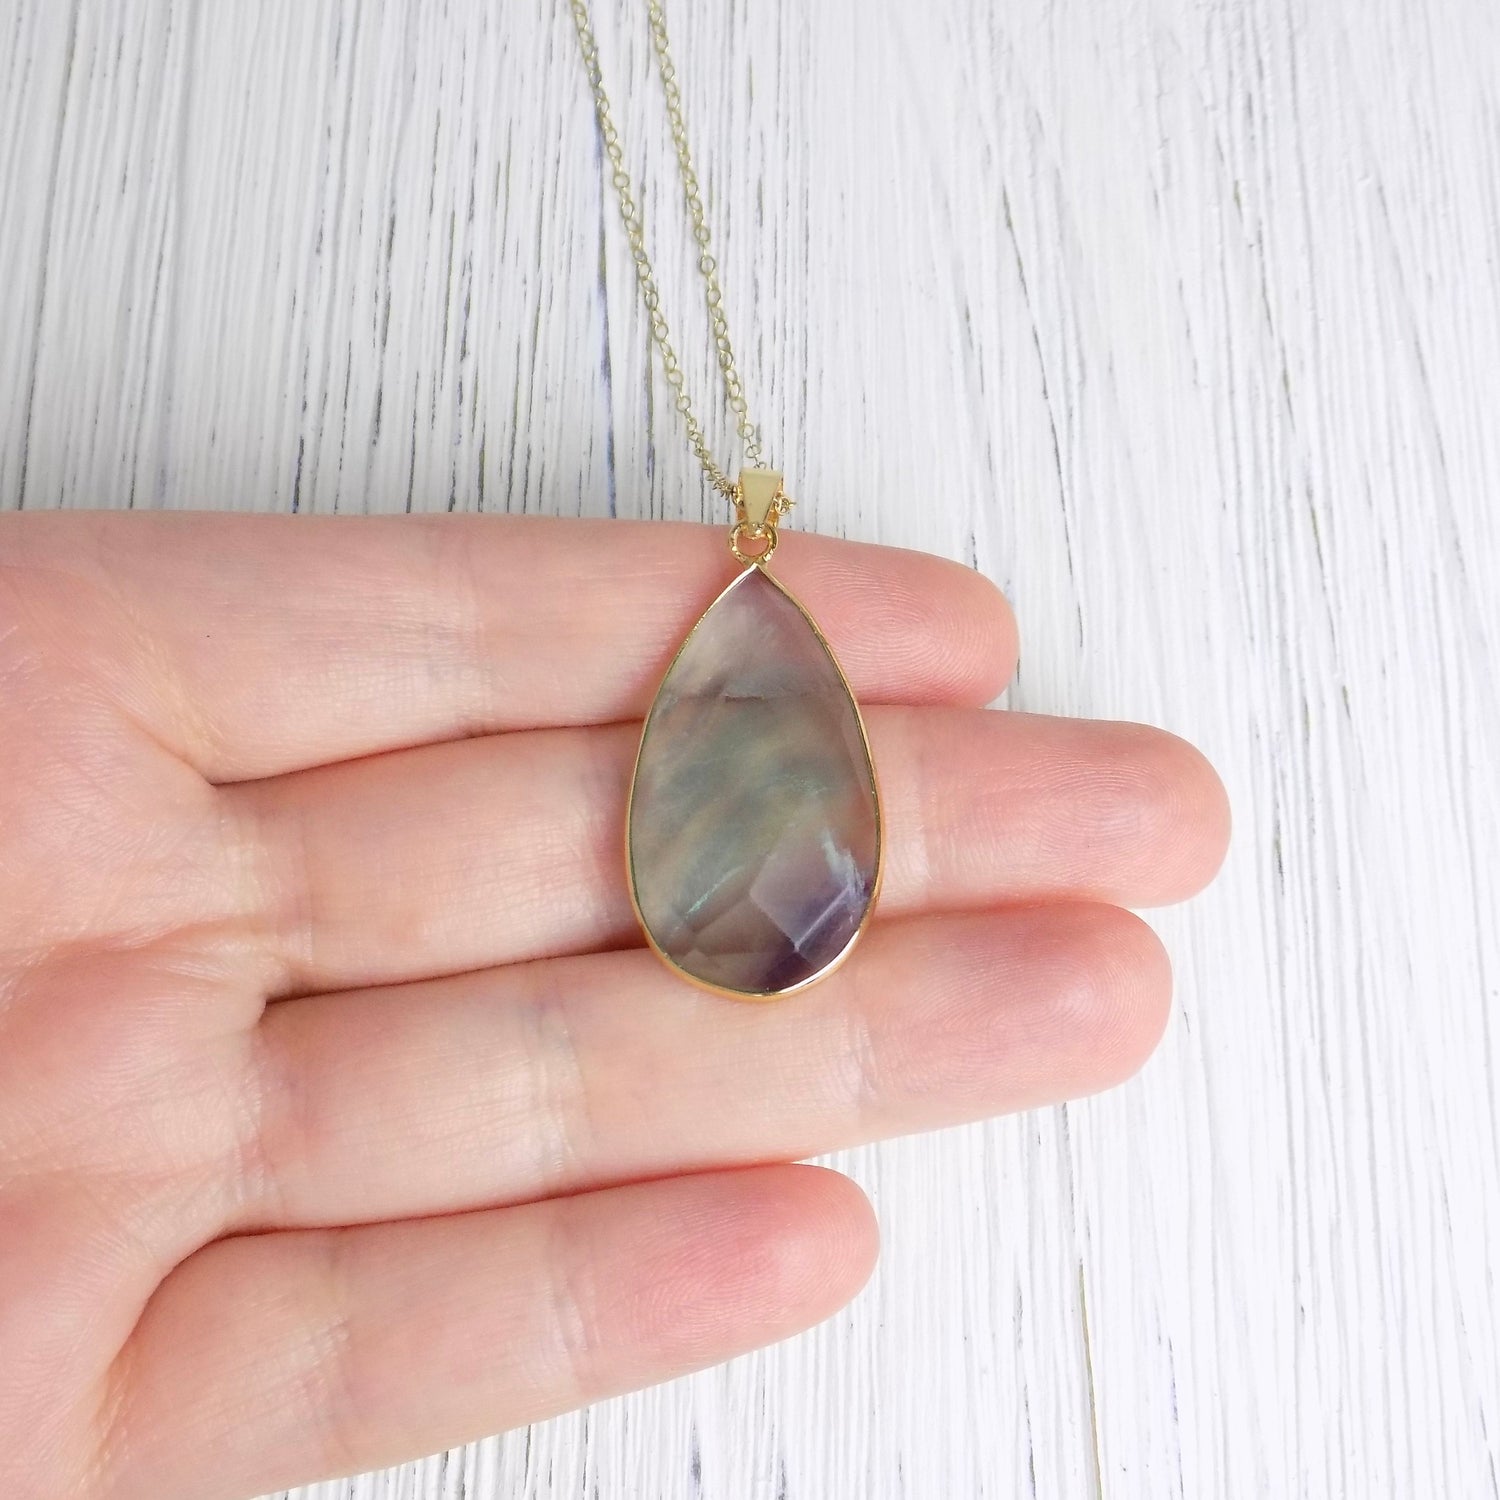 Fluorite Necklace, Boho Necklace, Purple Green Crystal Necklace, Chunky Gemstone Necklace, Gold Layering Necklace, Mom Gift, M6-165